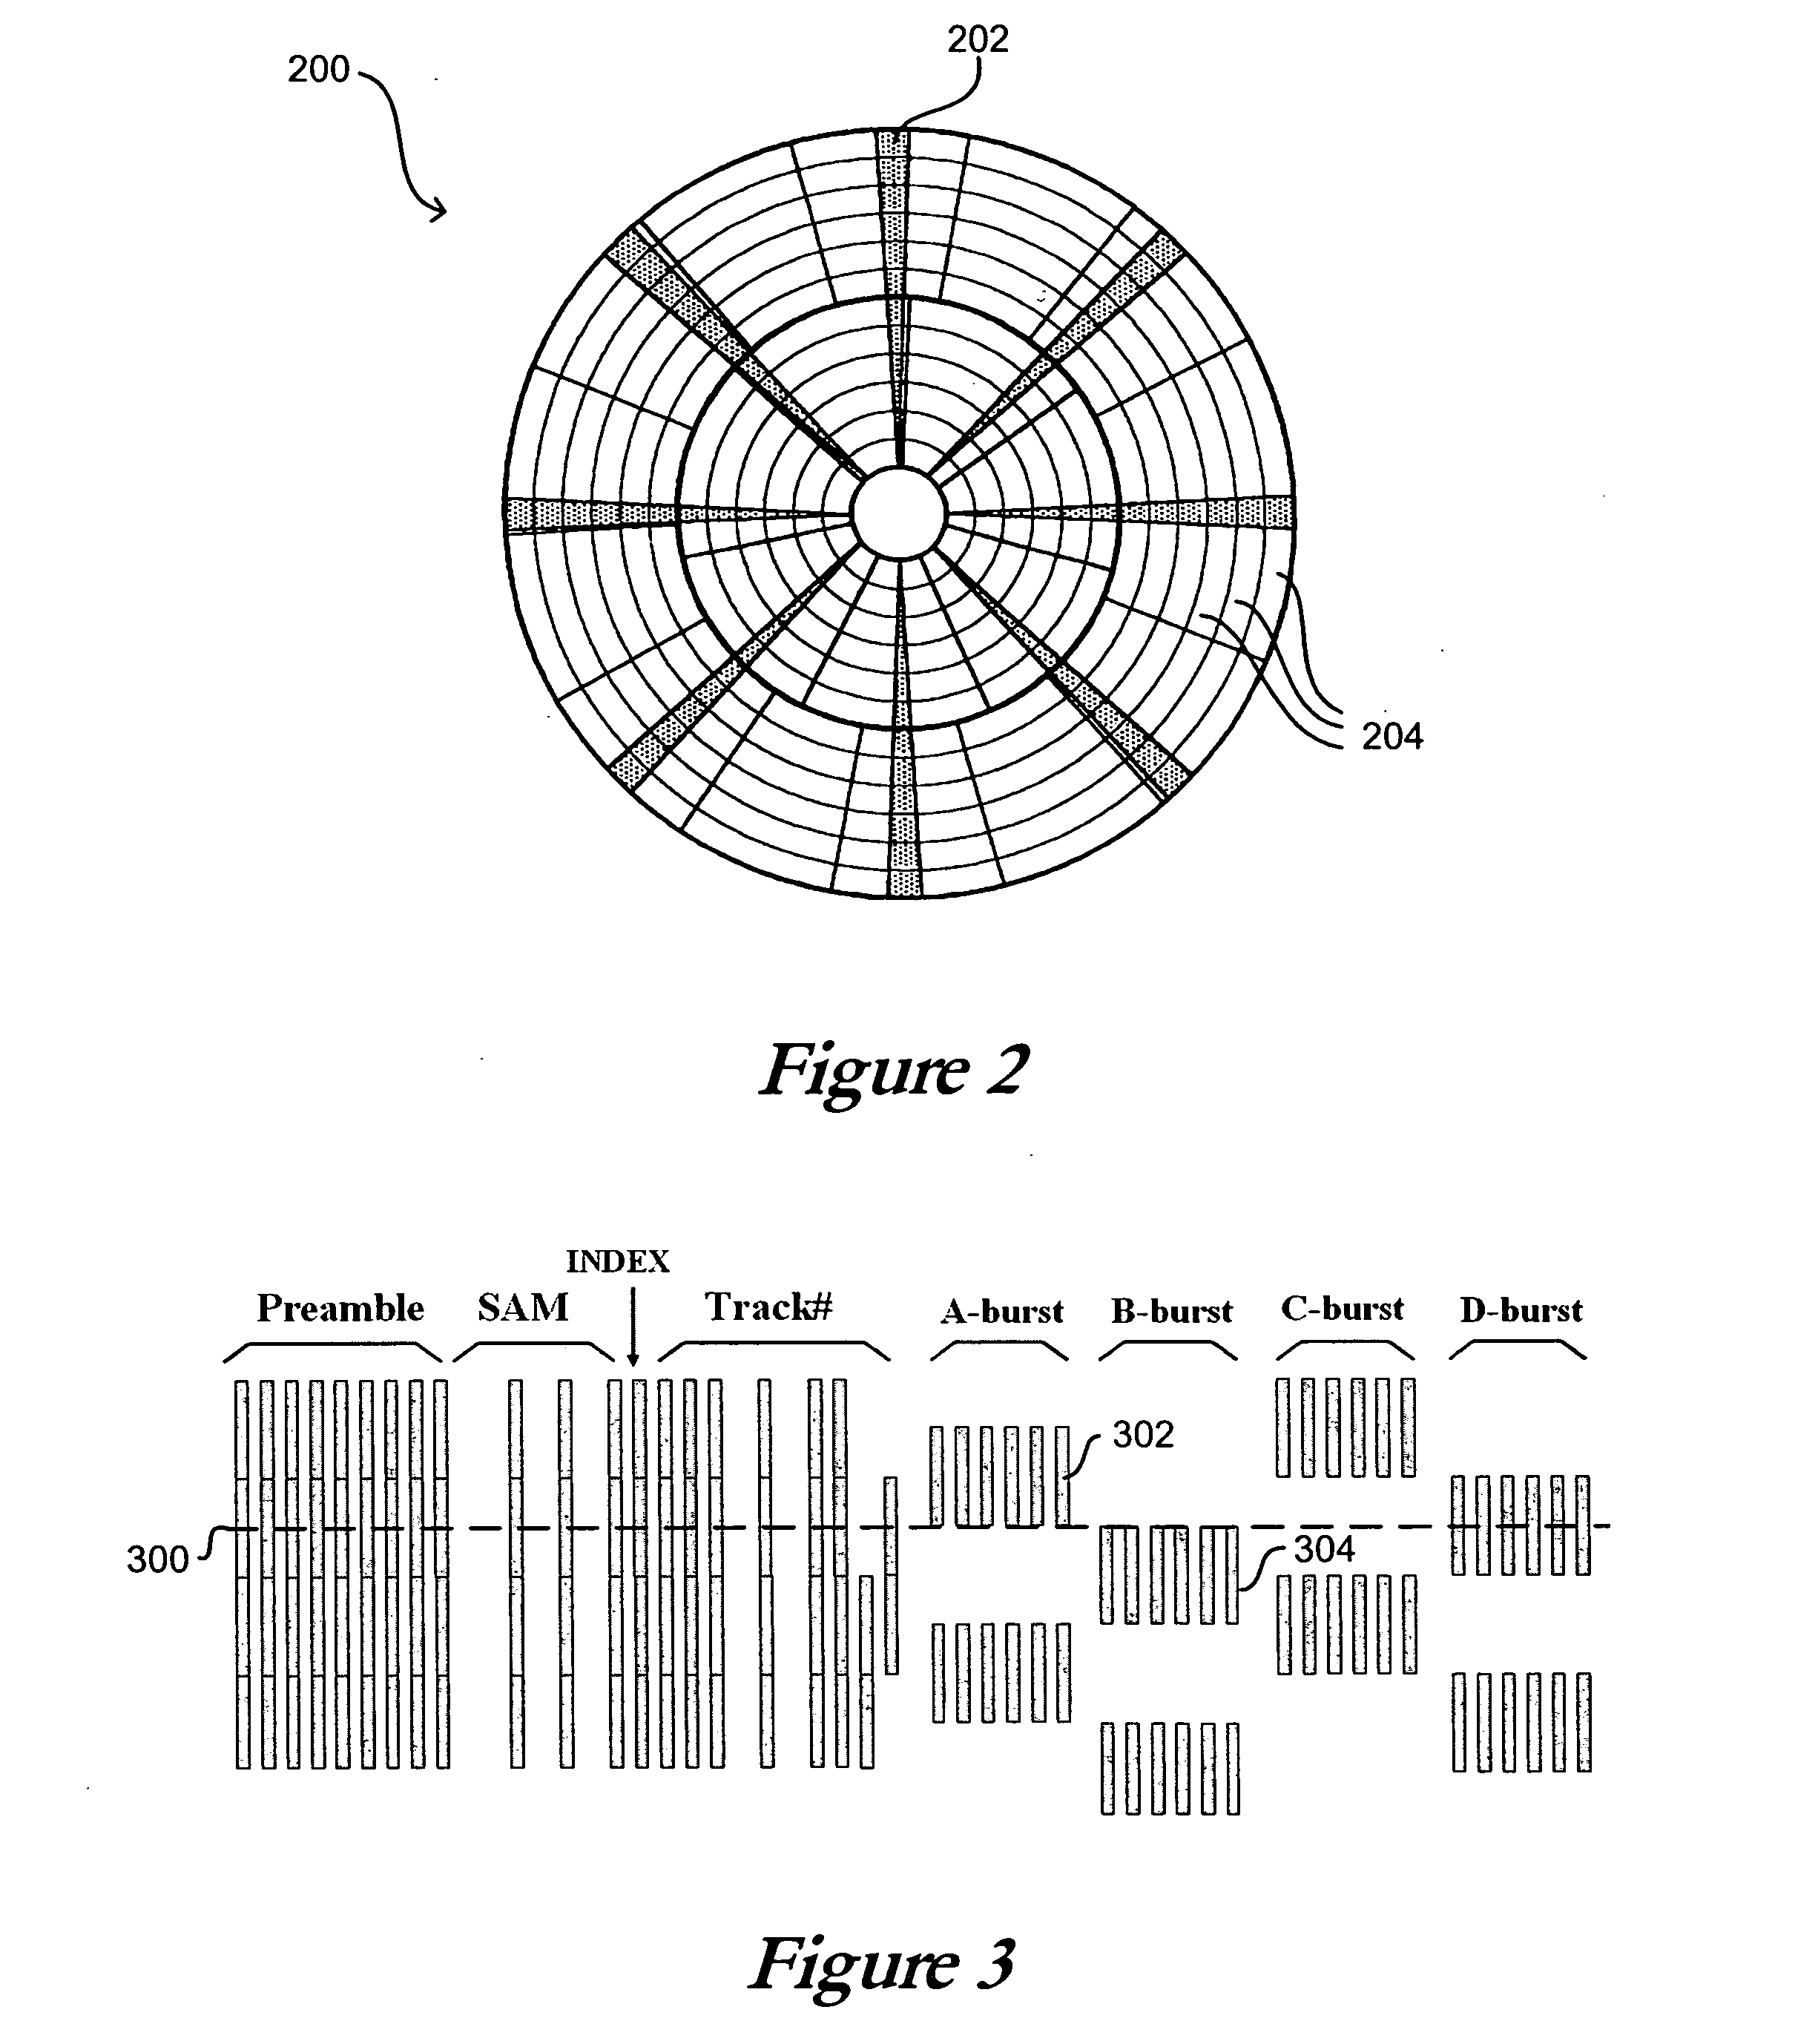 Systems using extended servo patterns with variable multi-pass servowriting and self-servowriting